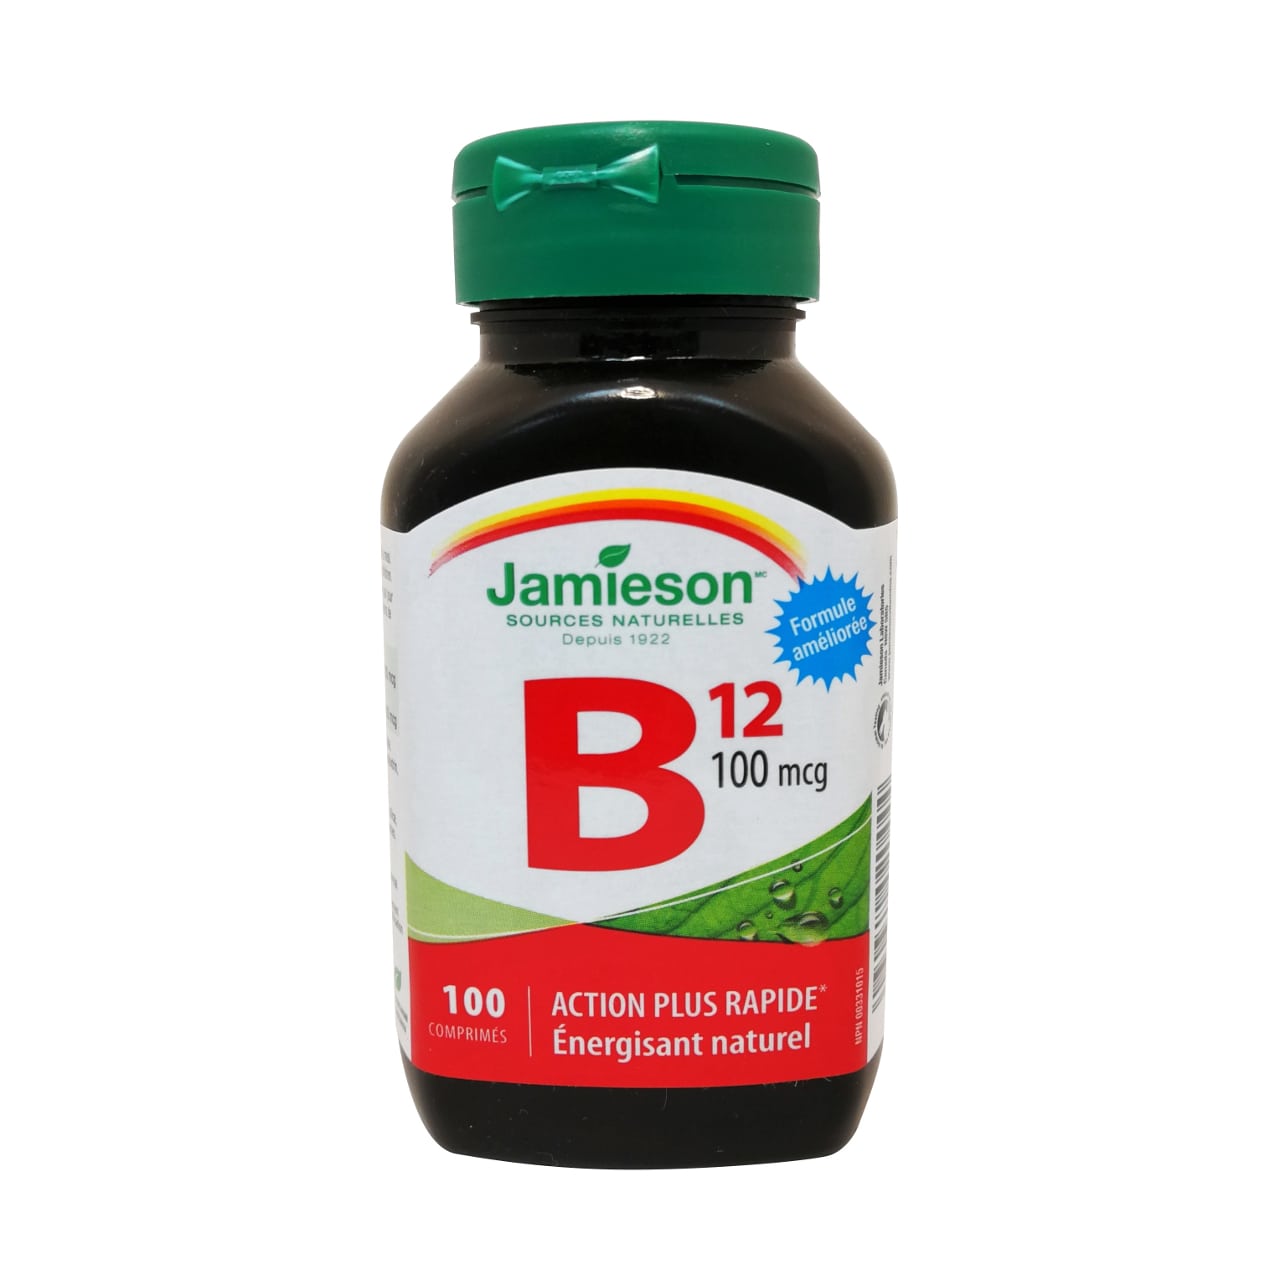 Product label for Jamieson B12 100mcg in French